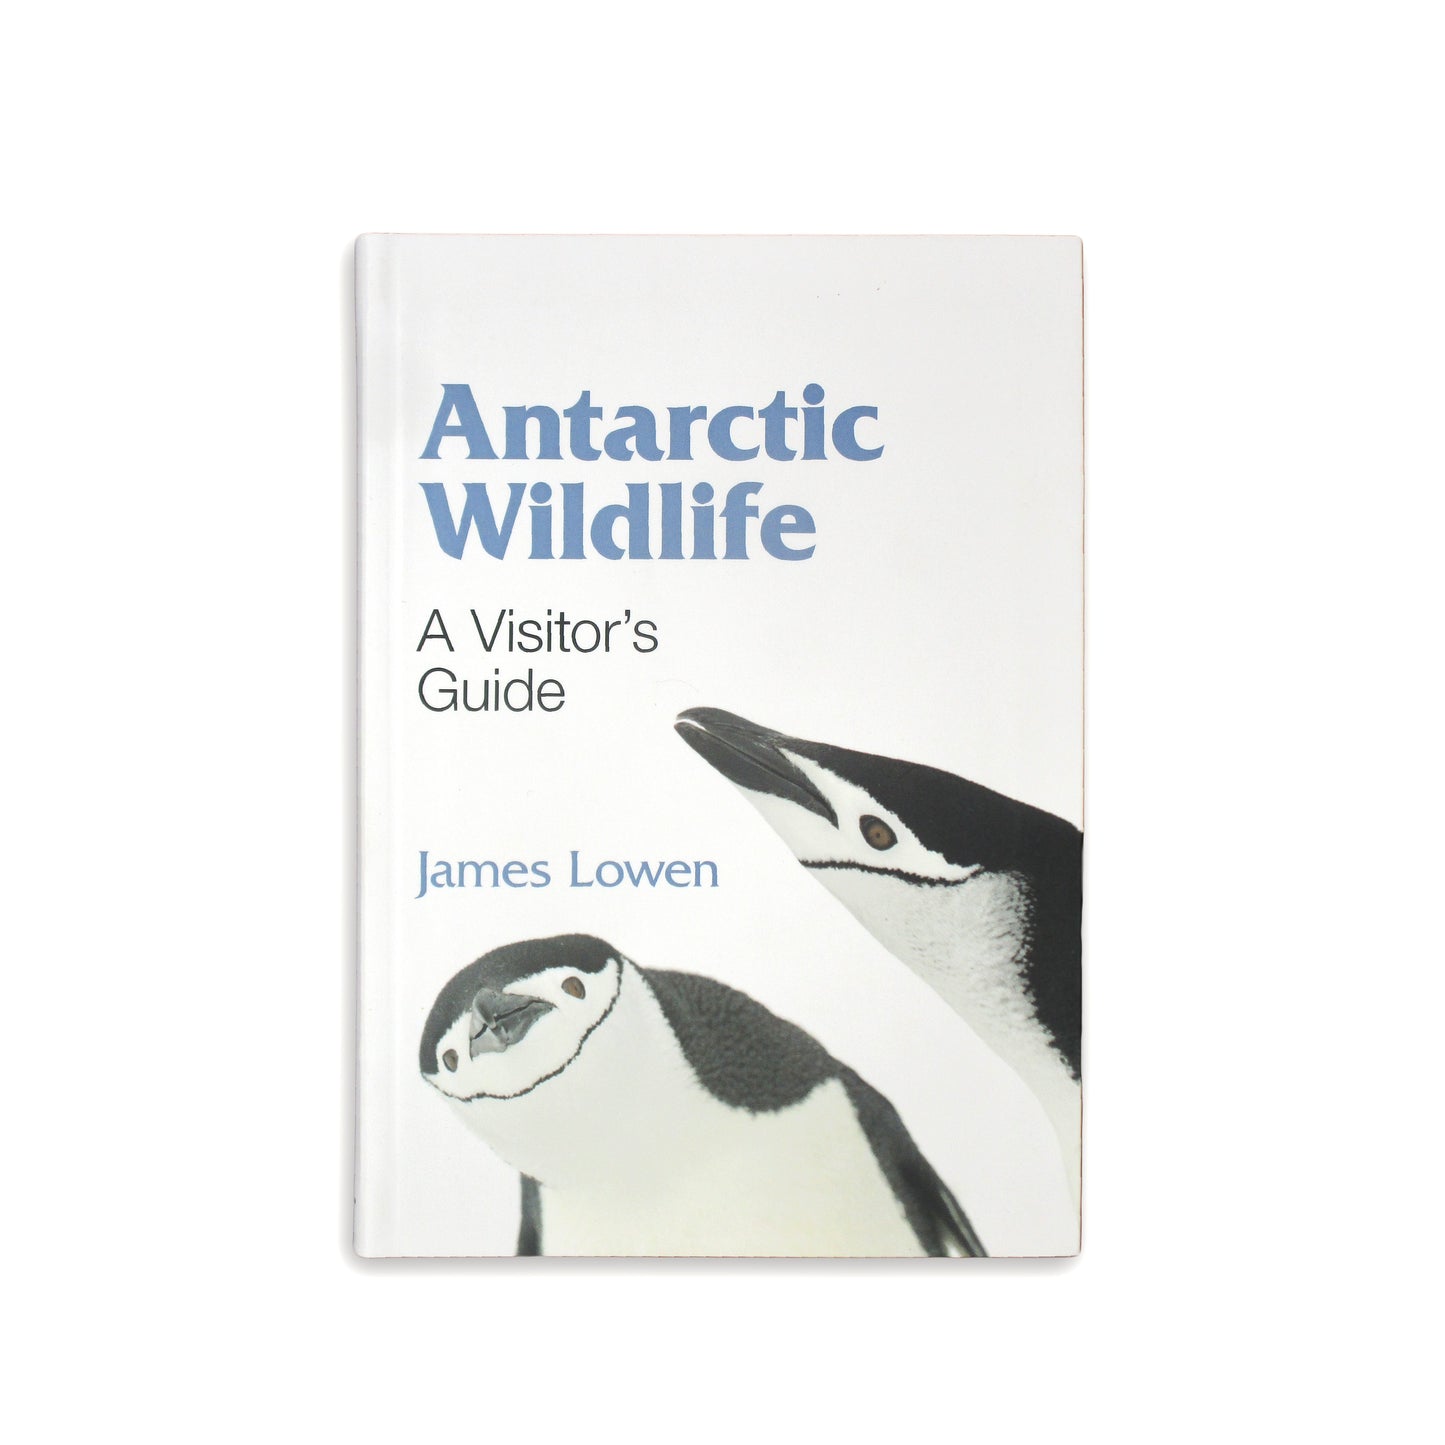 Antarctic Wildlife: A Visitor's Guide - James Lowen (paperback)